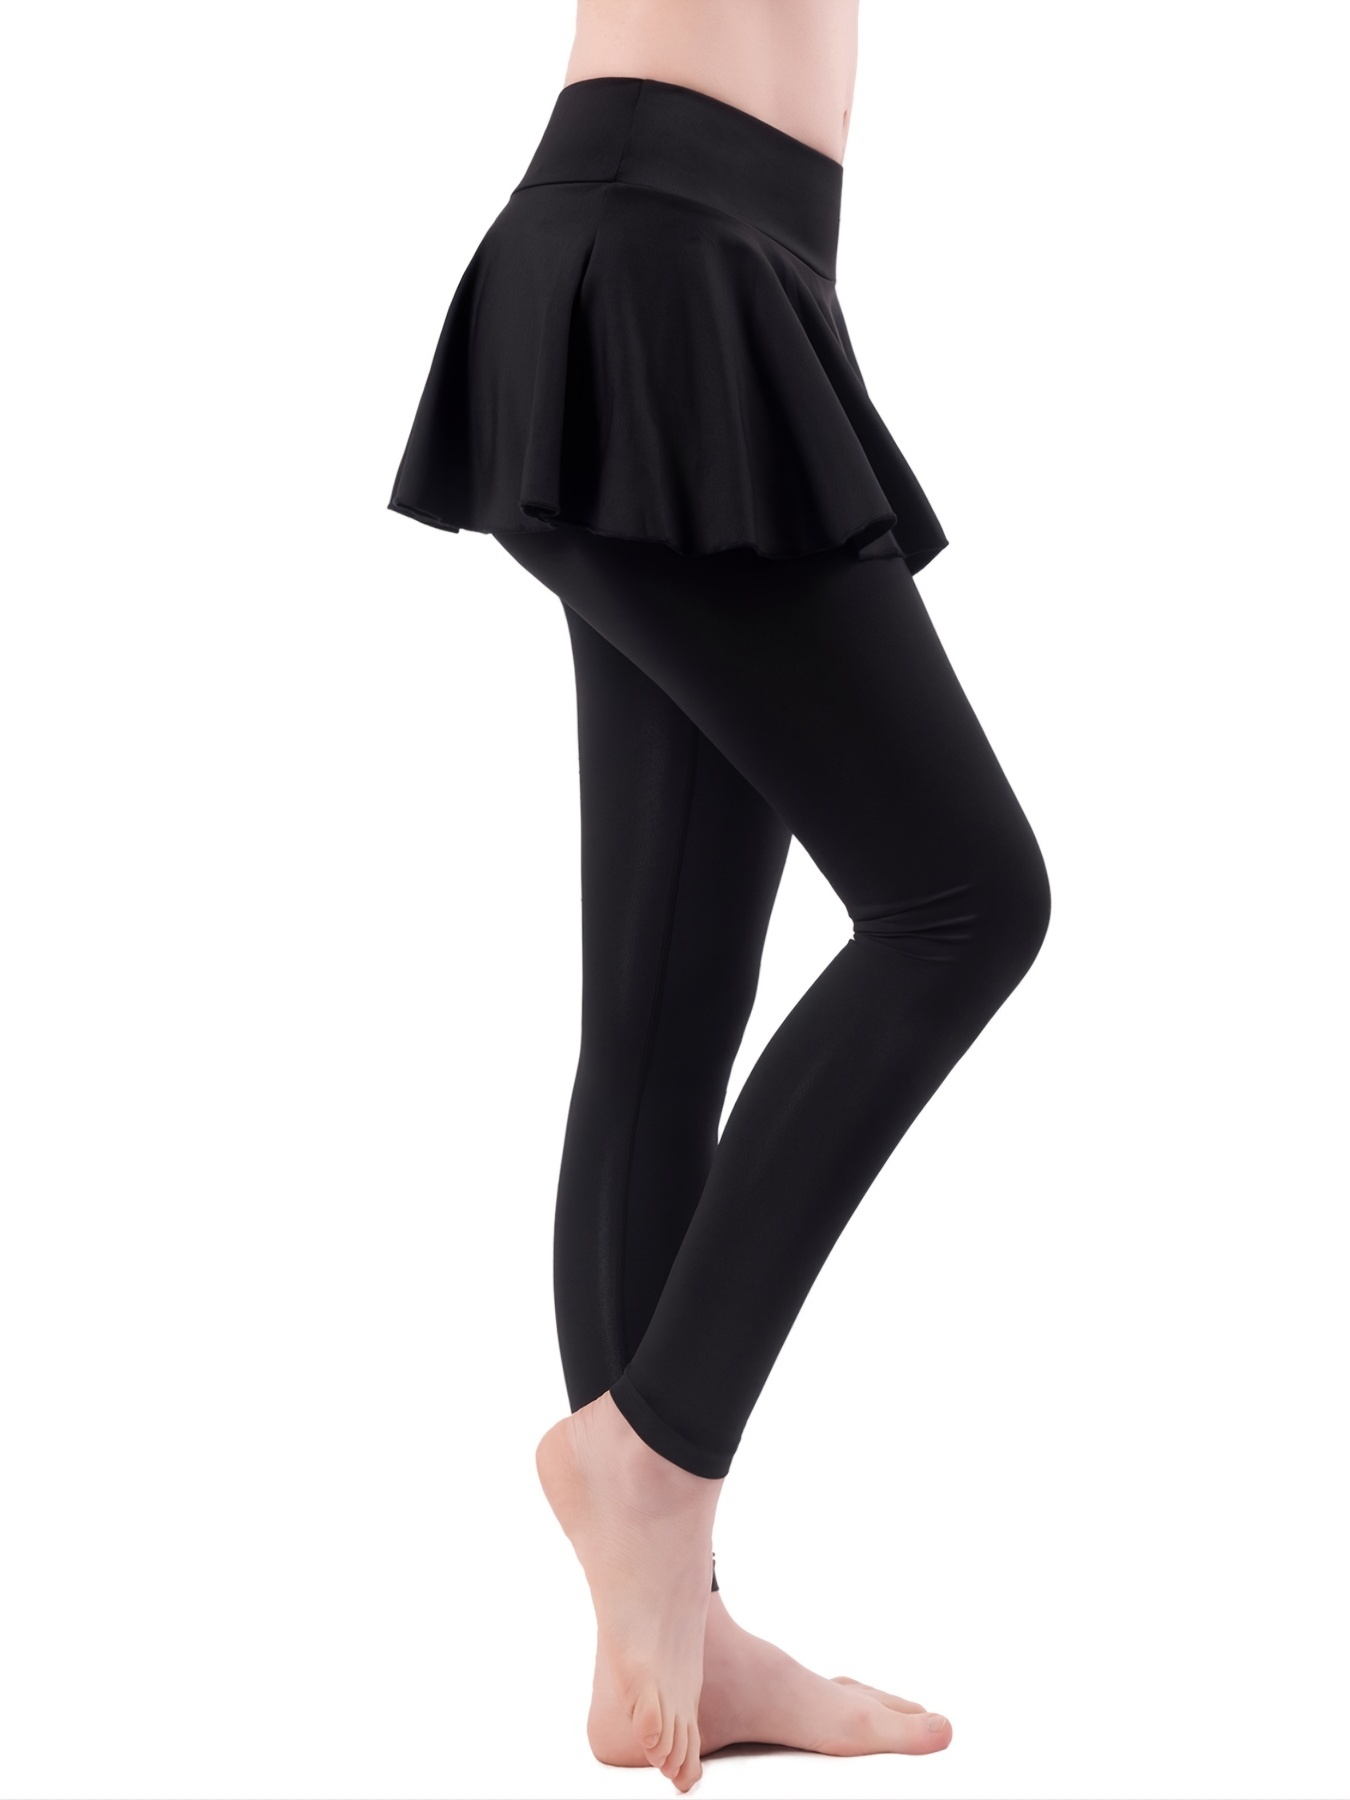 High Waist Nude Yoga Lyra Leggings Price With Built In Pocket For Womens  Fitness And Sports Workouts From Anfunikeon2, $20.71